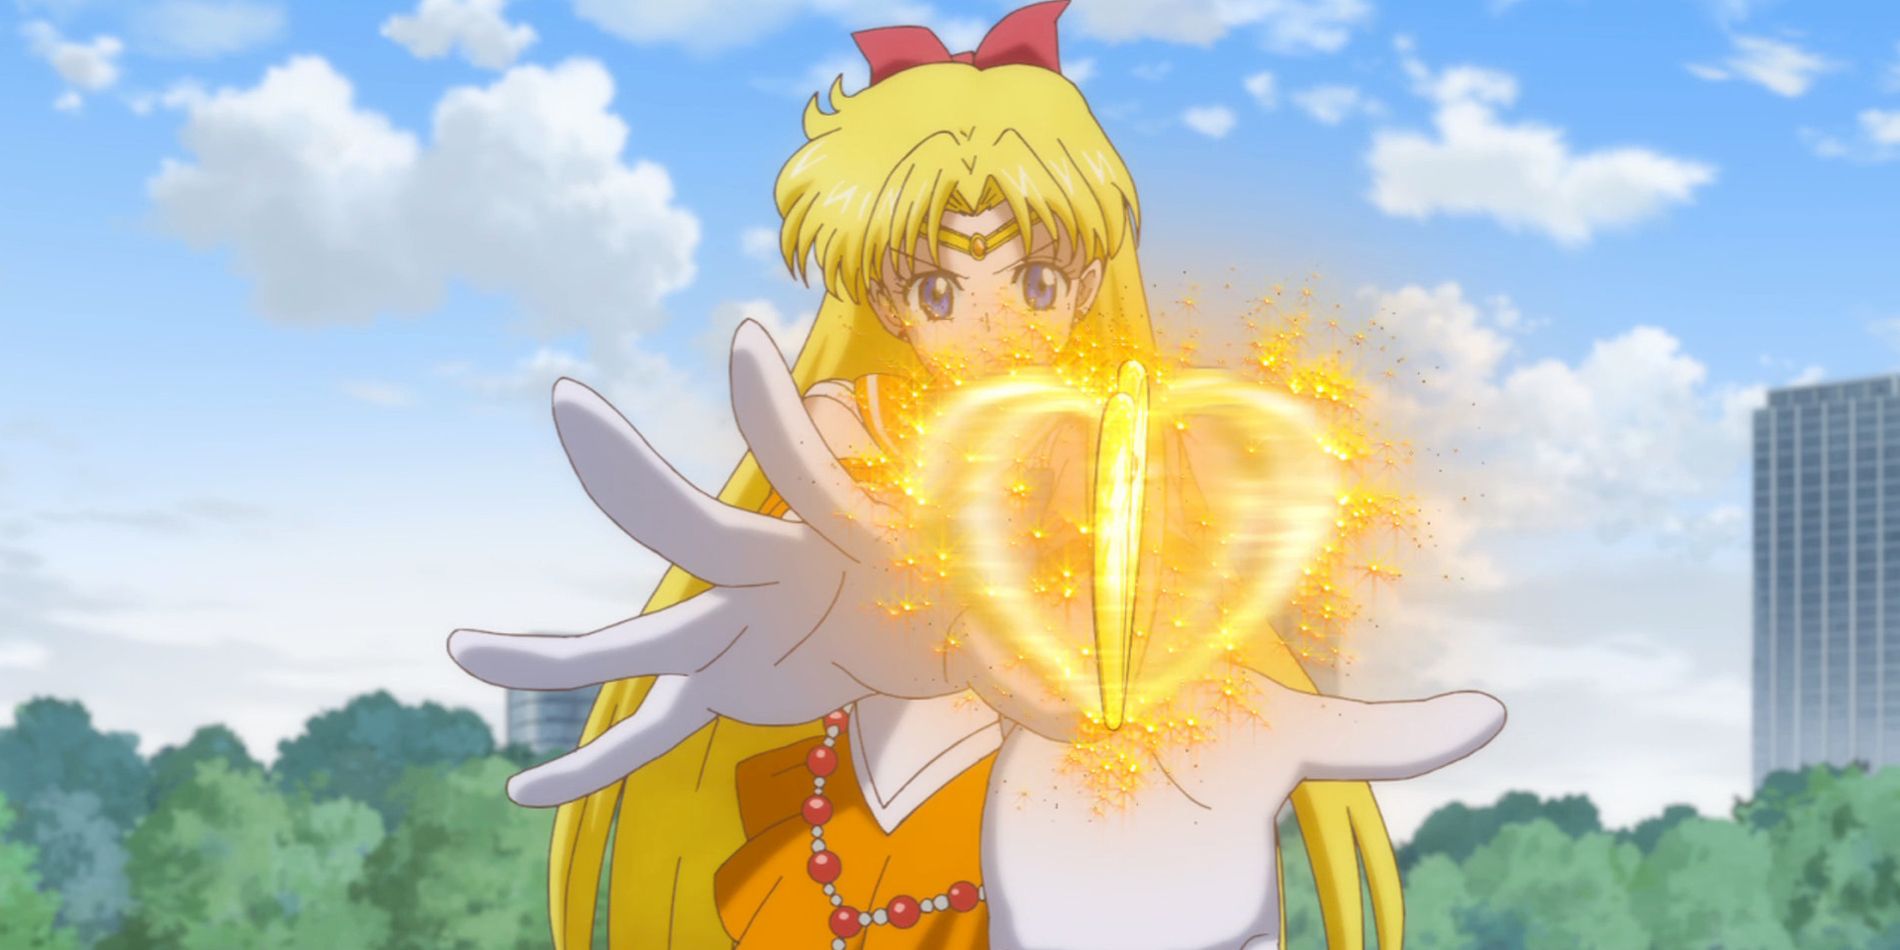 Venus Rolling Heart Vibration attack from Sailor Moon Crystal Act 18